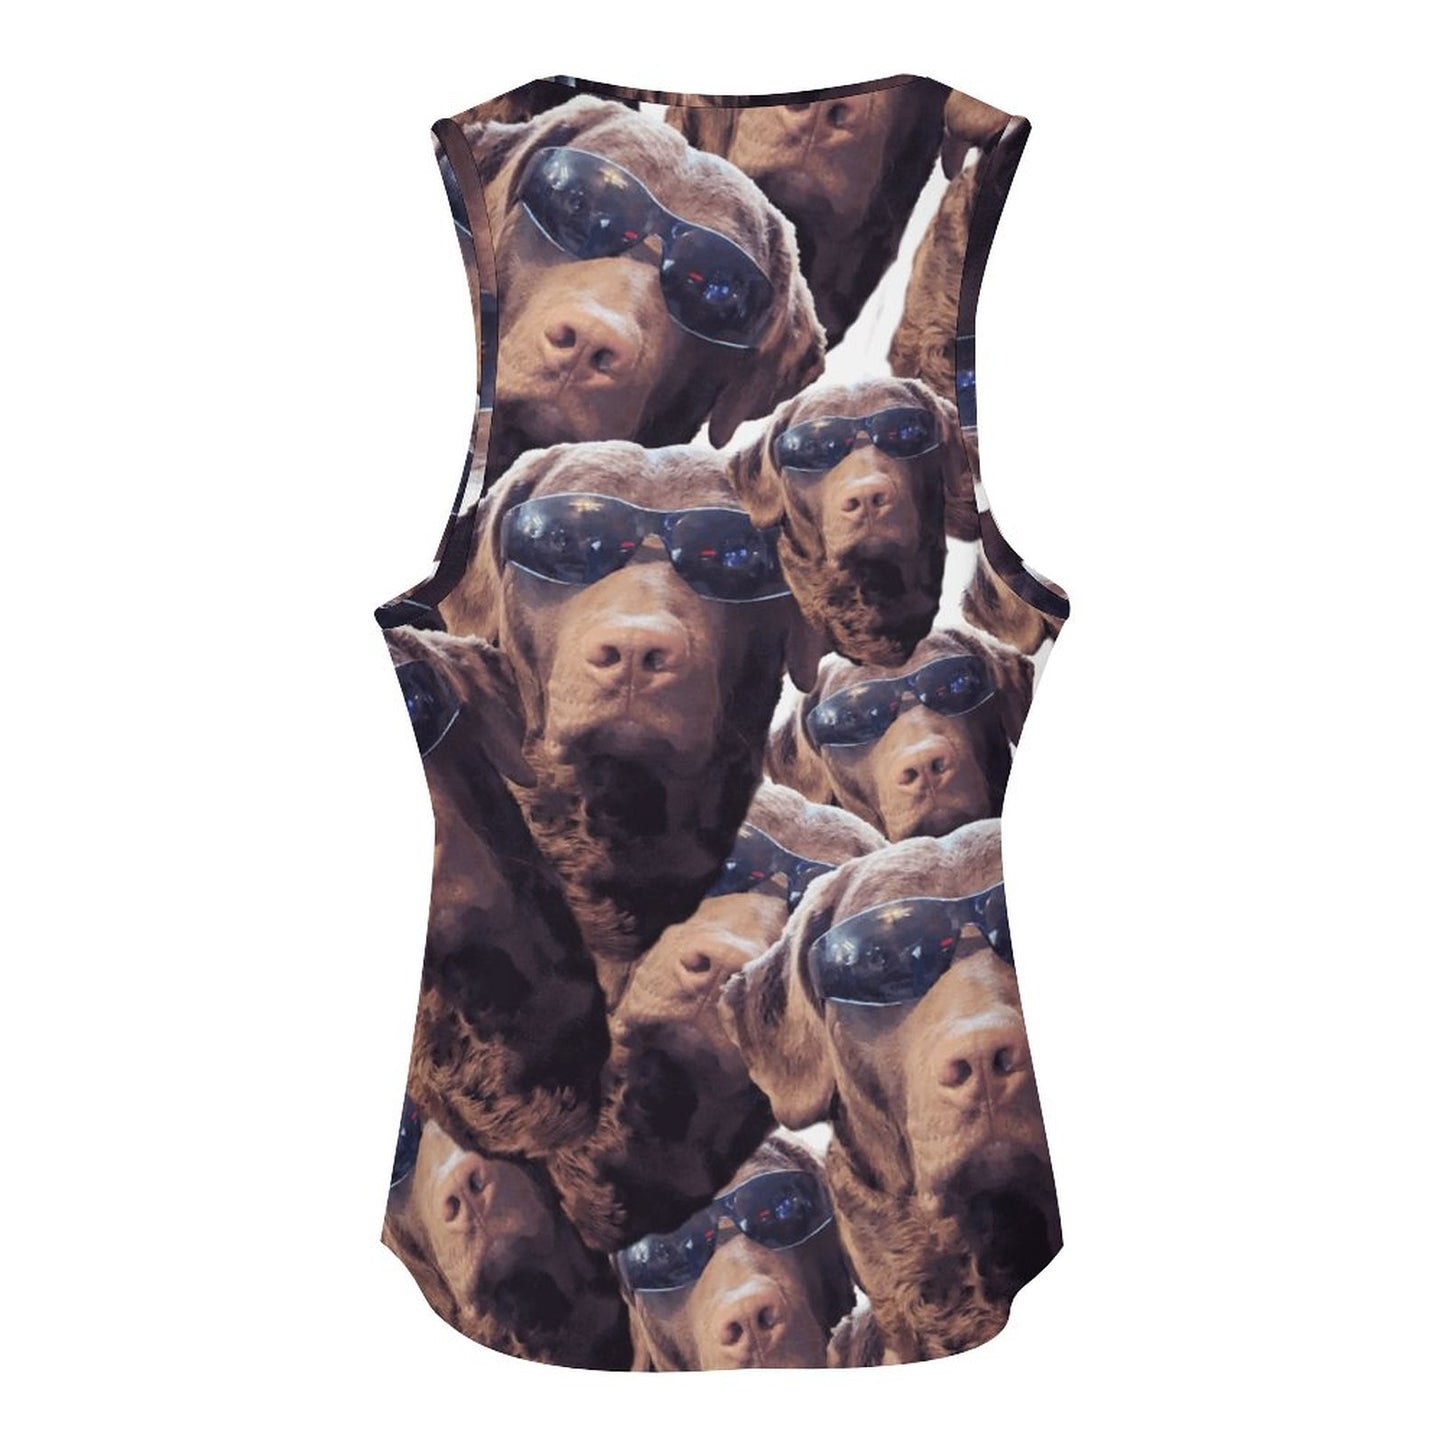 FOXY LADY _ LAB _ COLLAGE FACE DESIGN -Women's Tank Top